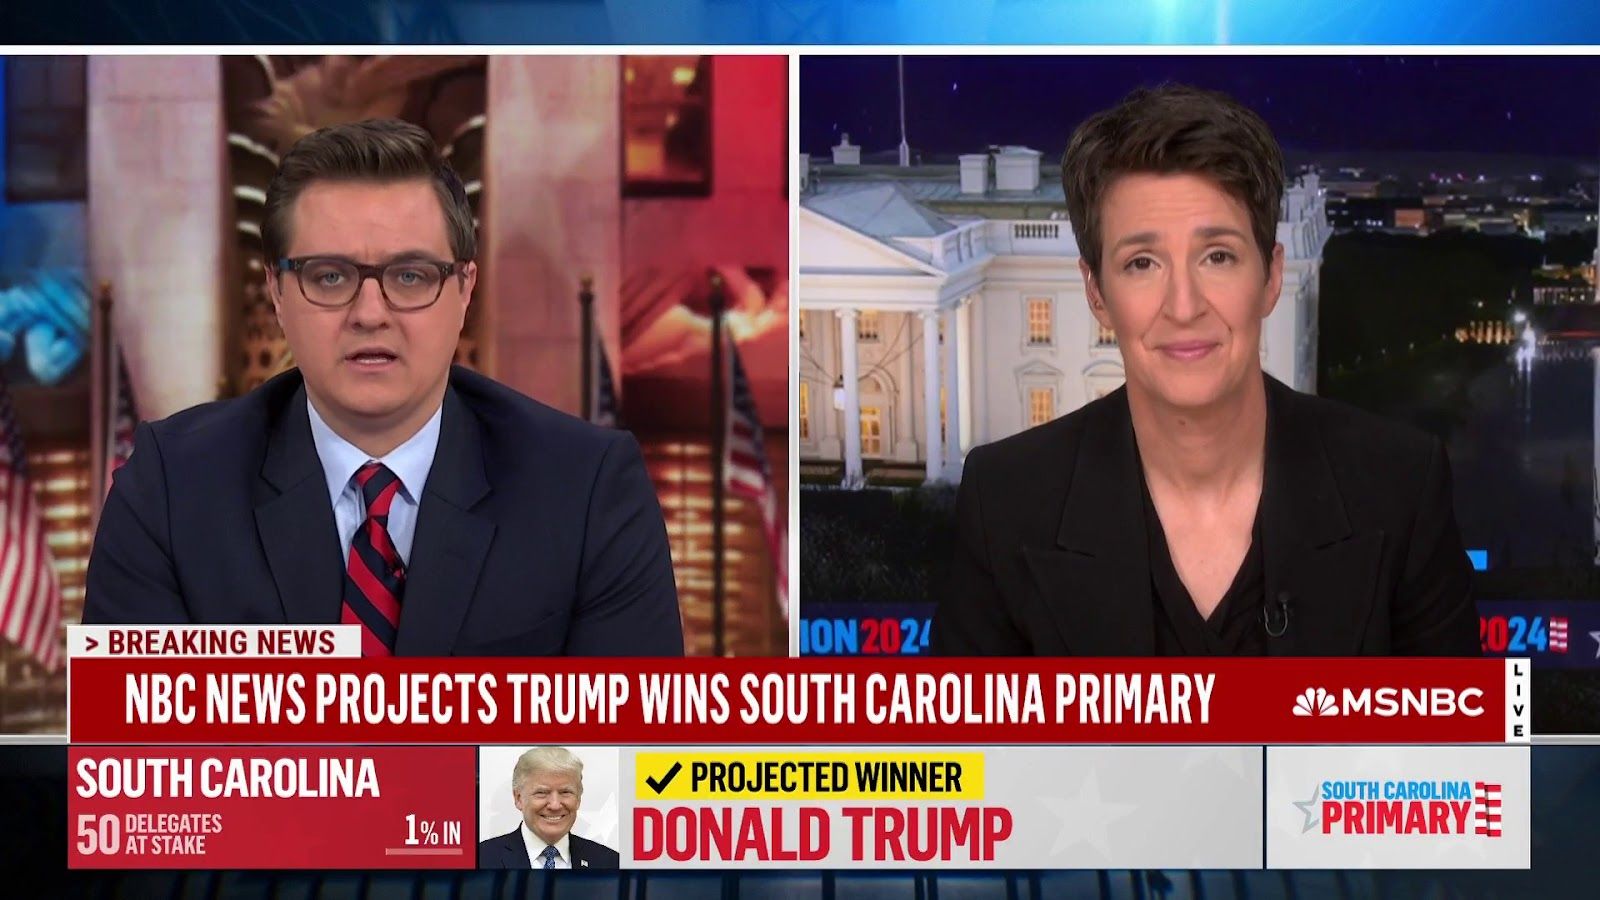 MSNBC's Chris Hayes and Rachel Maddow during last night's coverage. Photo: MSNBC 